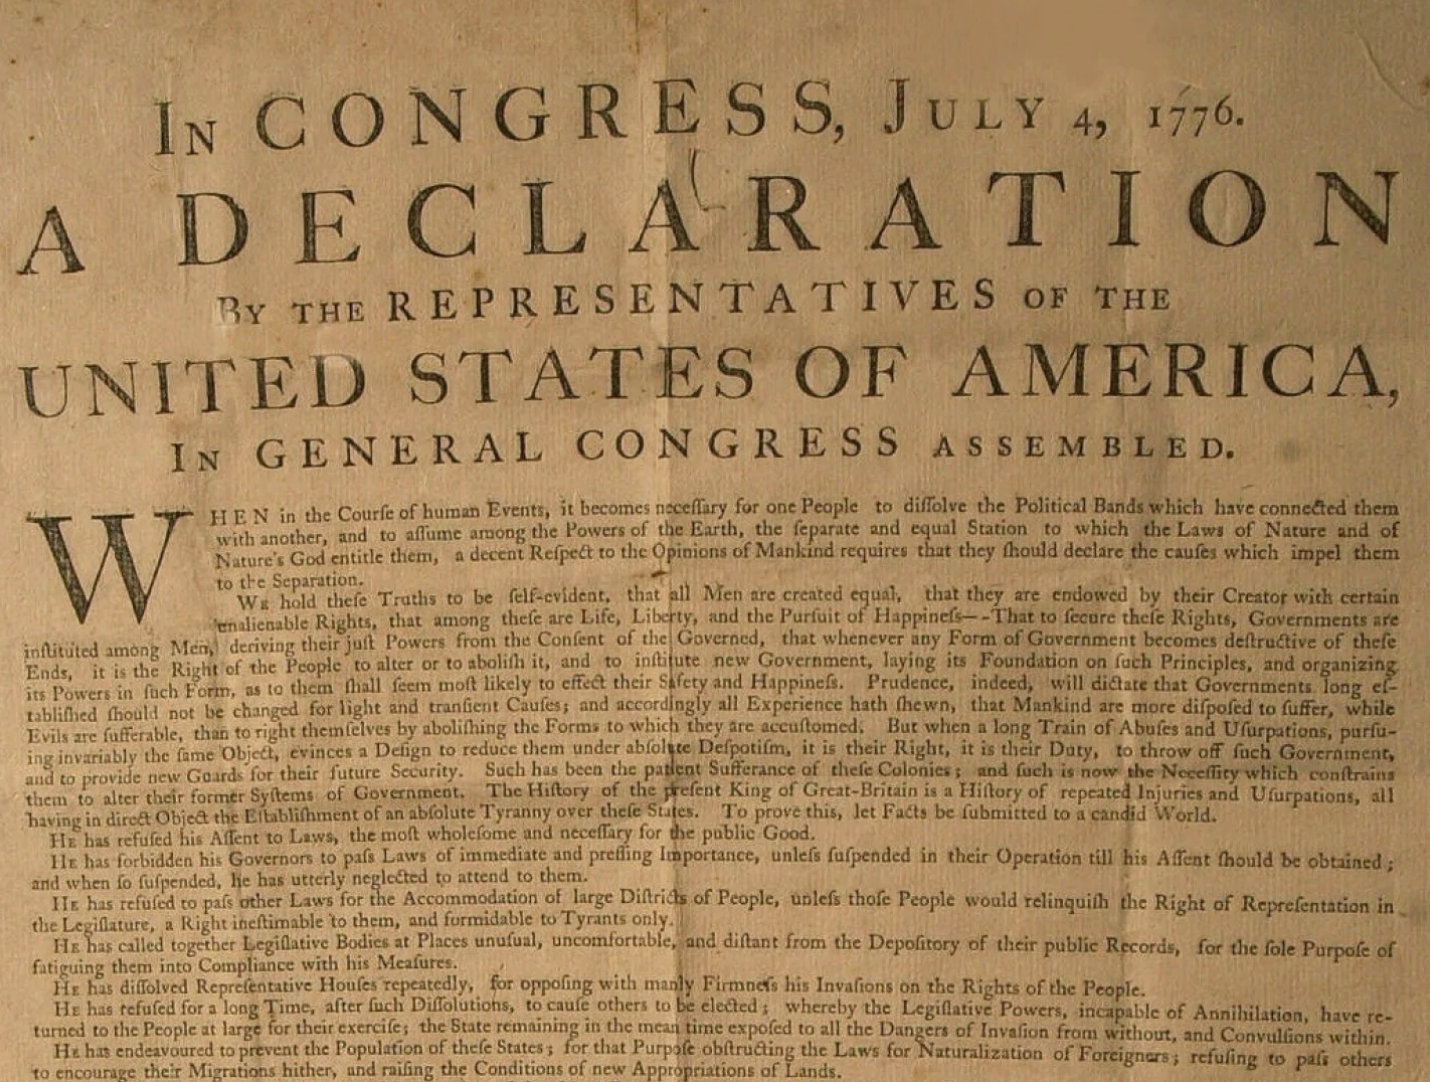 The Declaration of Independence Creatively Translated